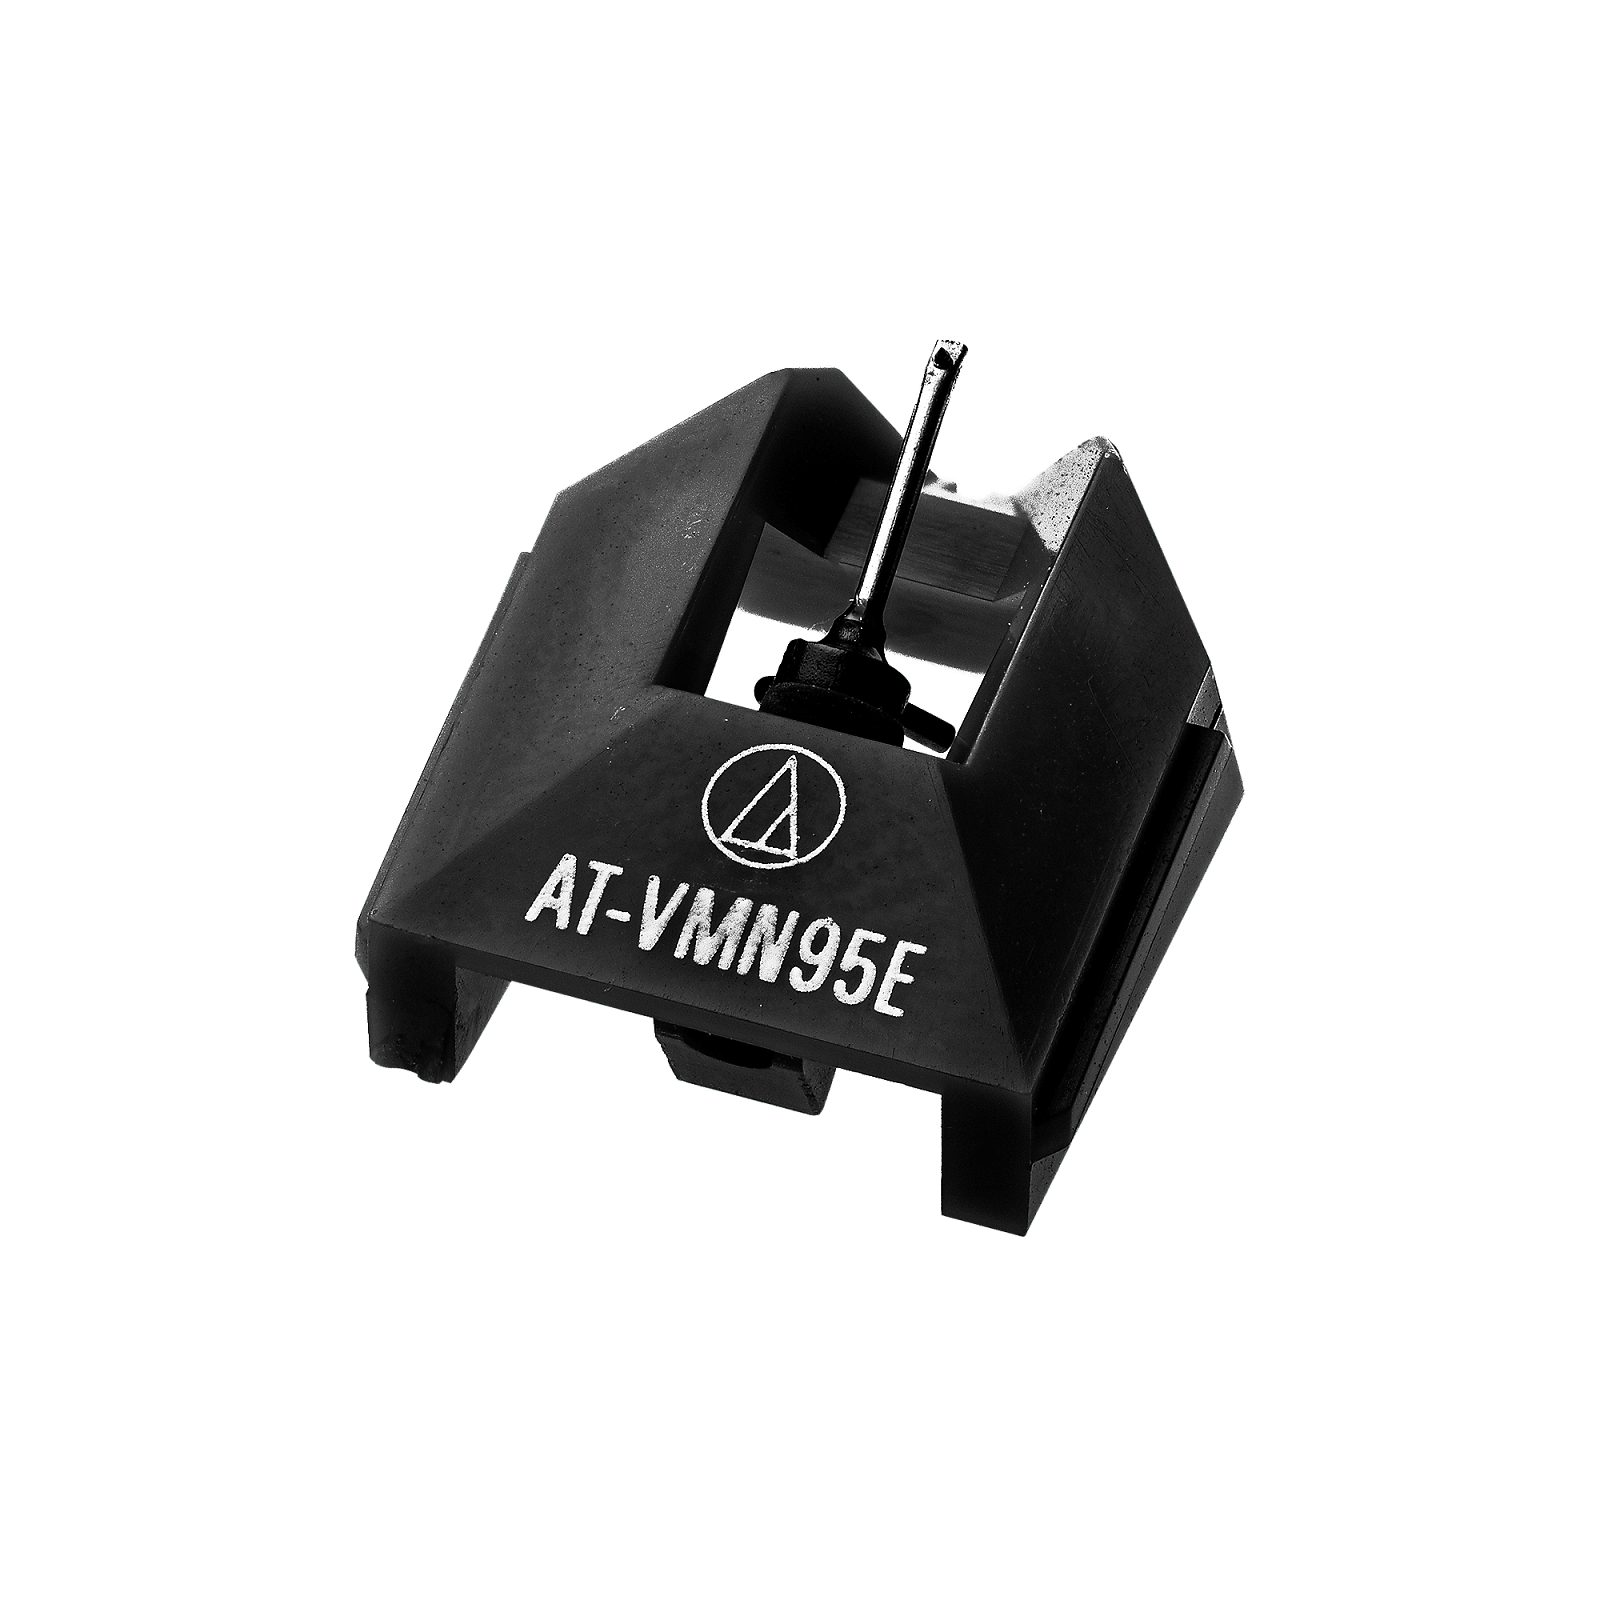 Audio-Technica AT-VMN95EBK Stylus Replacement For AT-VM95E